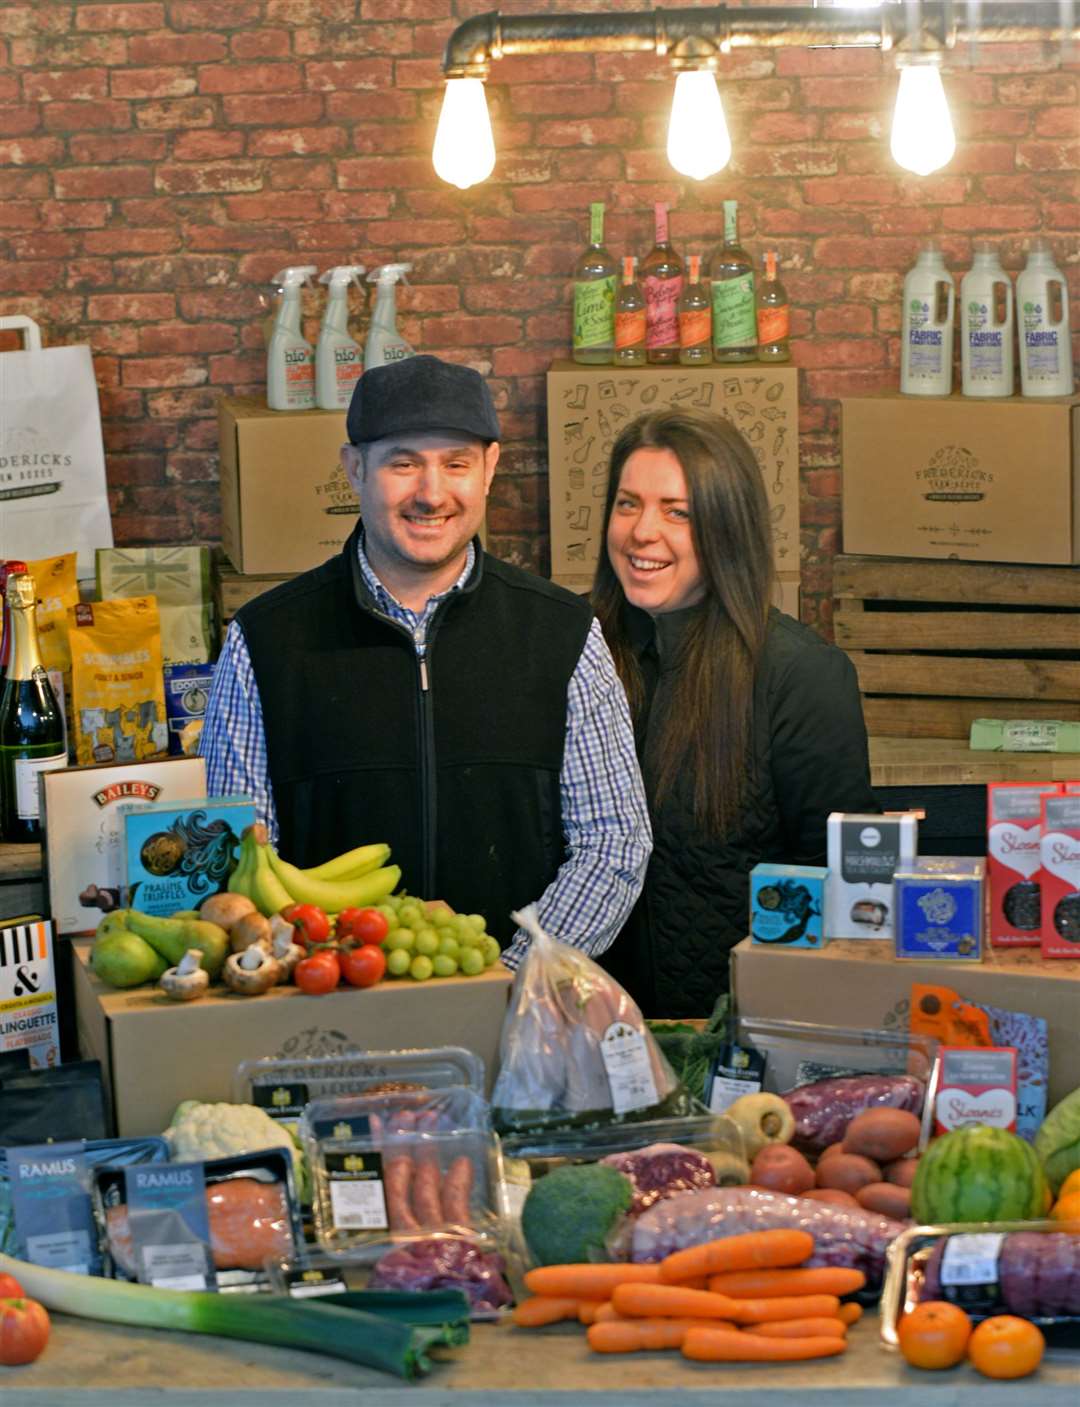 Frederick and Maria Hopkinson have launched Frederick's Farm Boxes from their base at the Peek Business Centre. Photograph: Vikki Lince